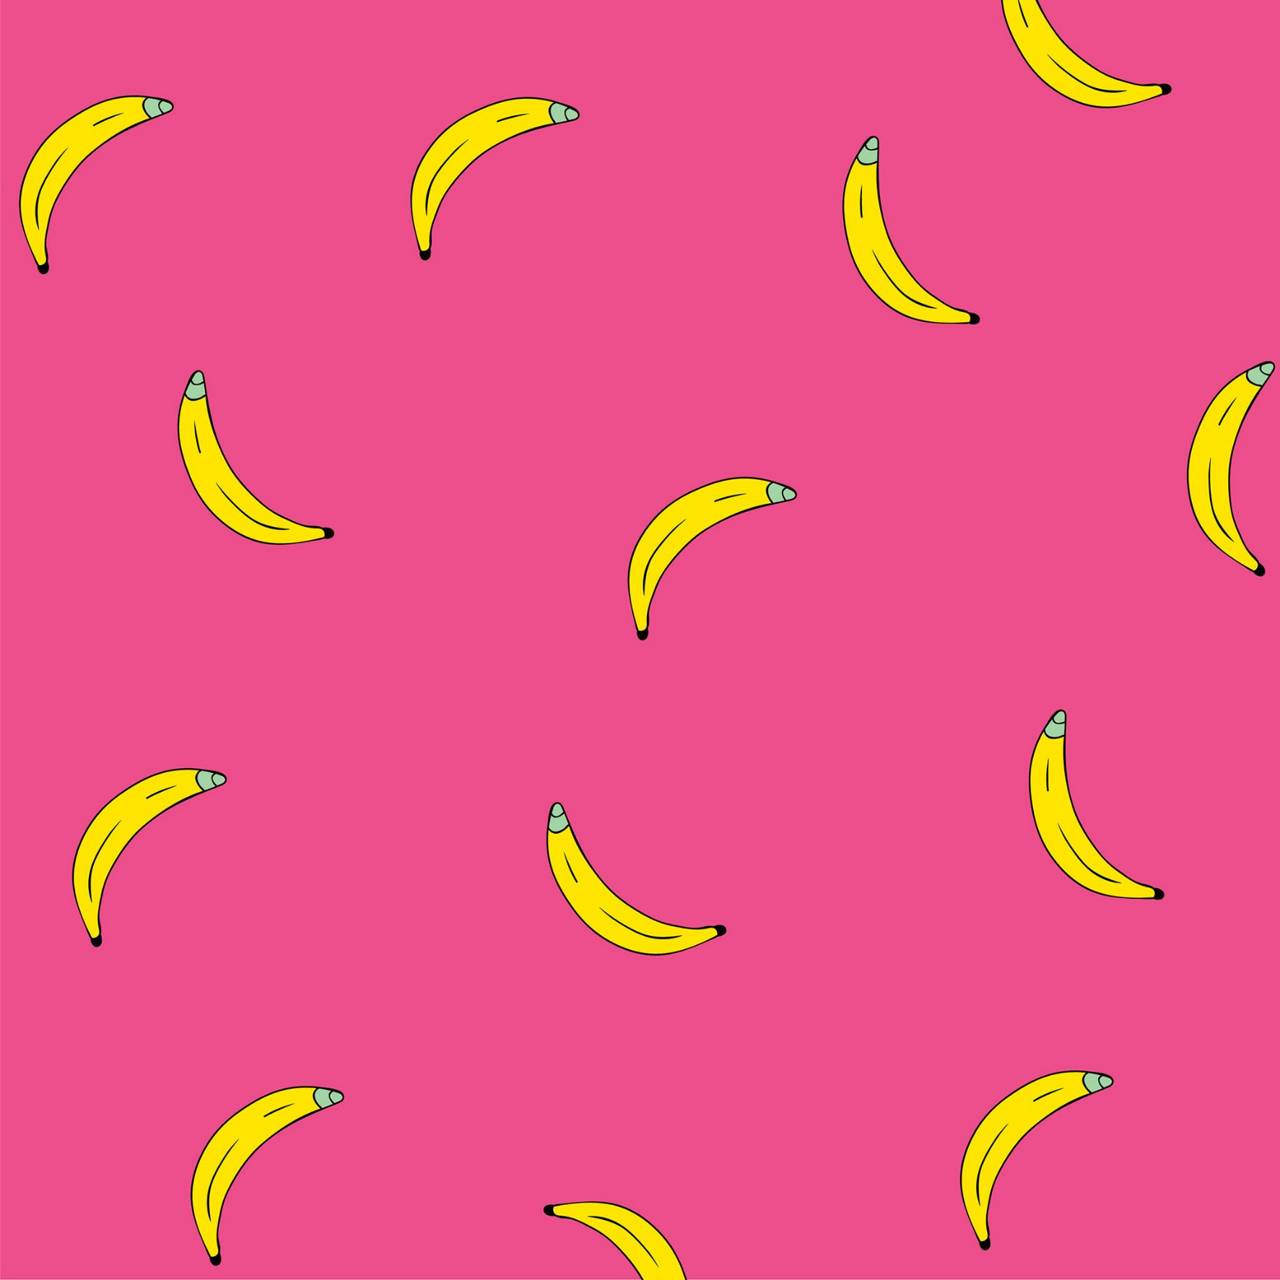 Download Banana wallpapers for mobile phone free Banana HD pictures